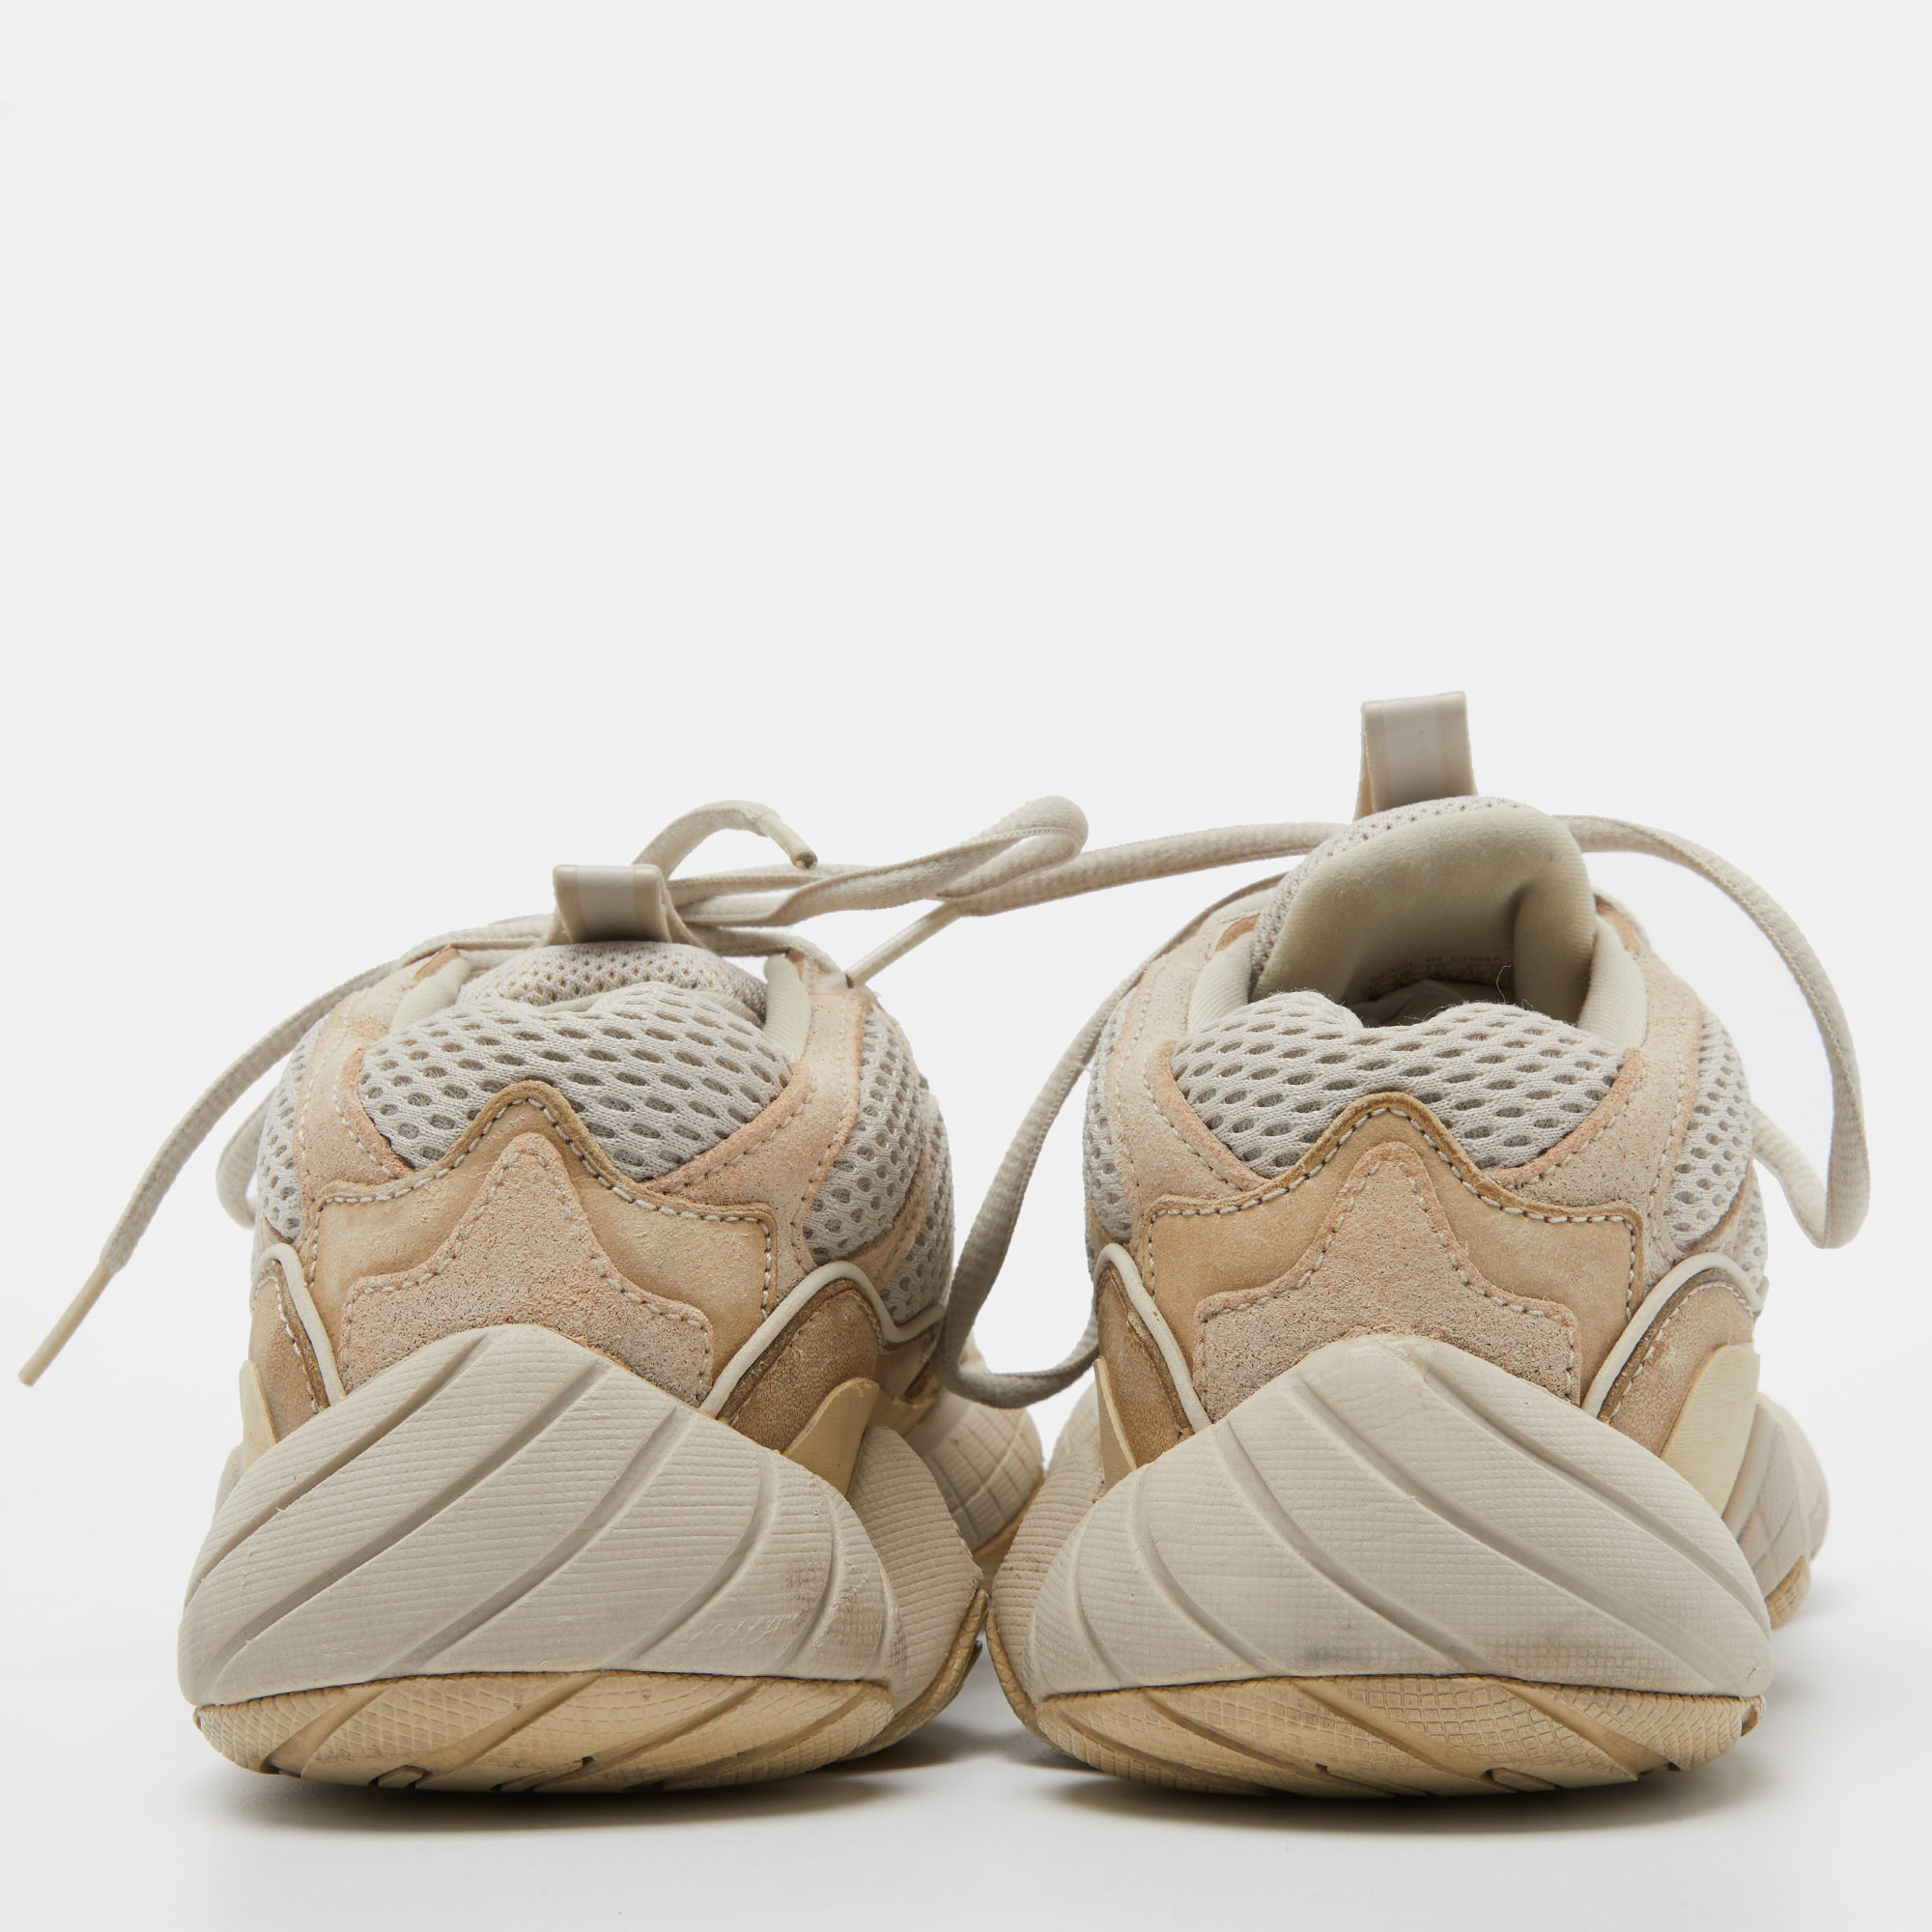 Yeezy X Adidas Cream Suede And Mesh Yeezy 500 Blush Sneakers Size 38 2/3